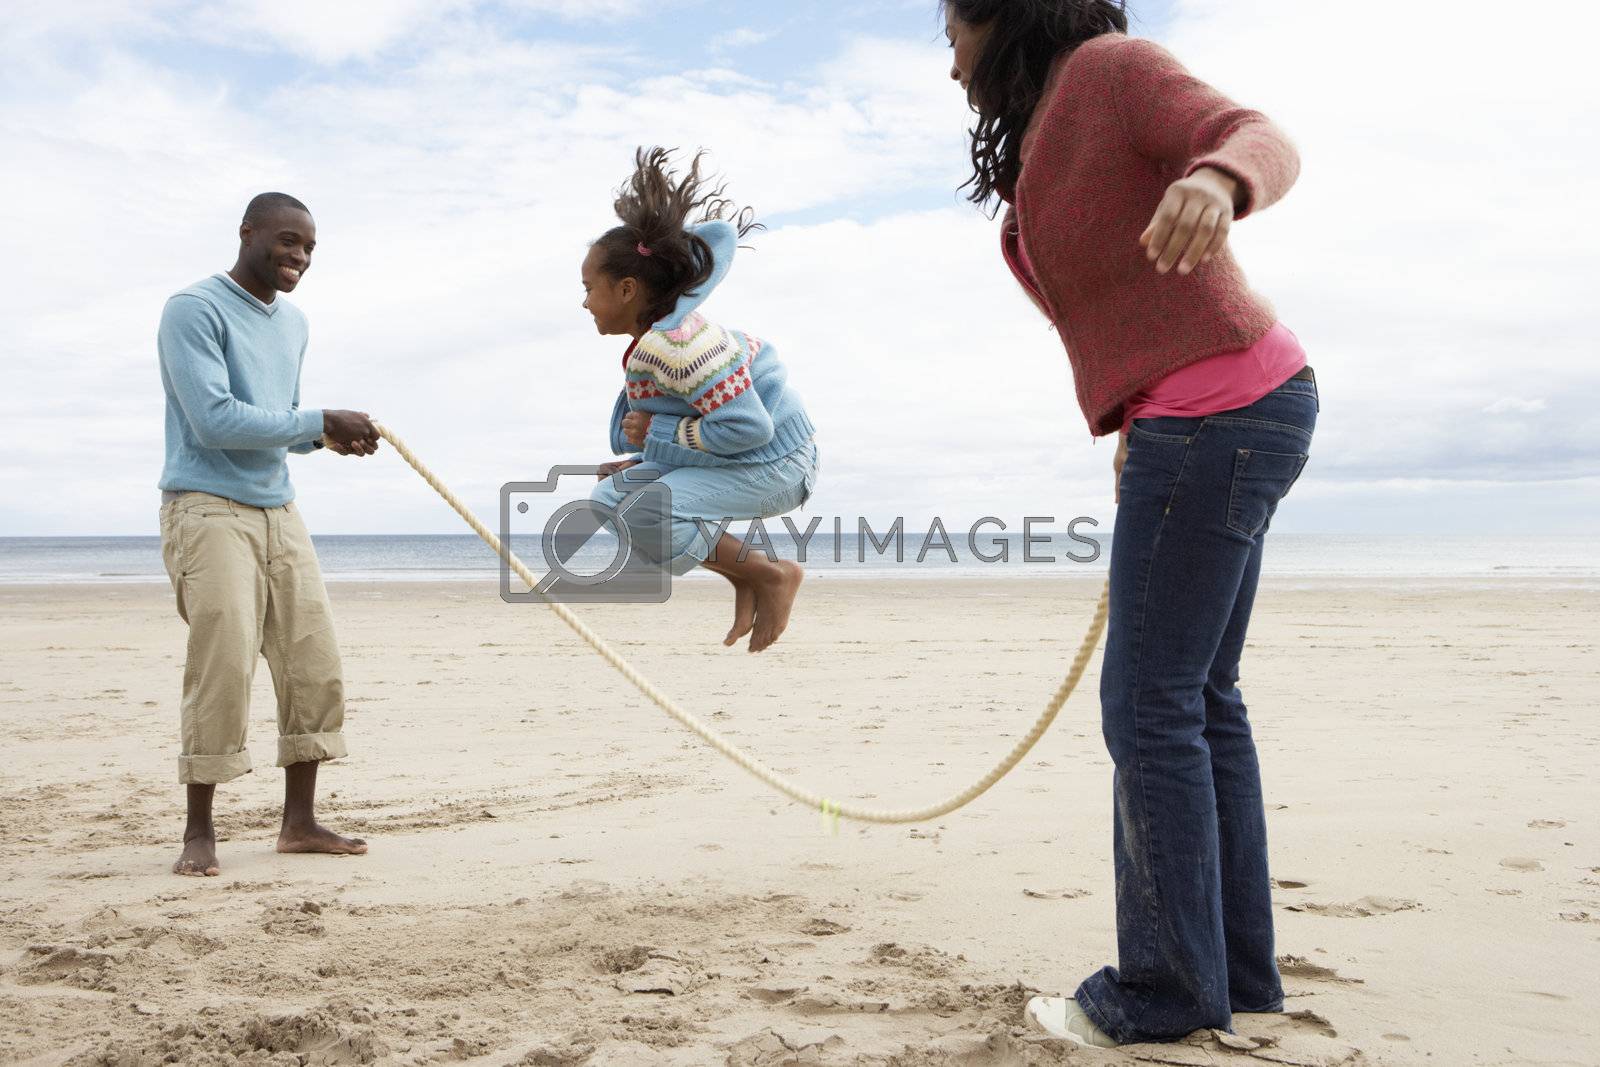 Royalty free image of Family playing on beach by omg_images